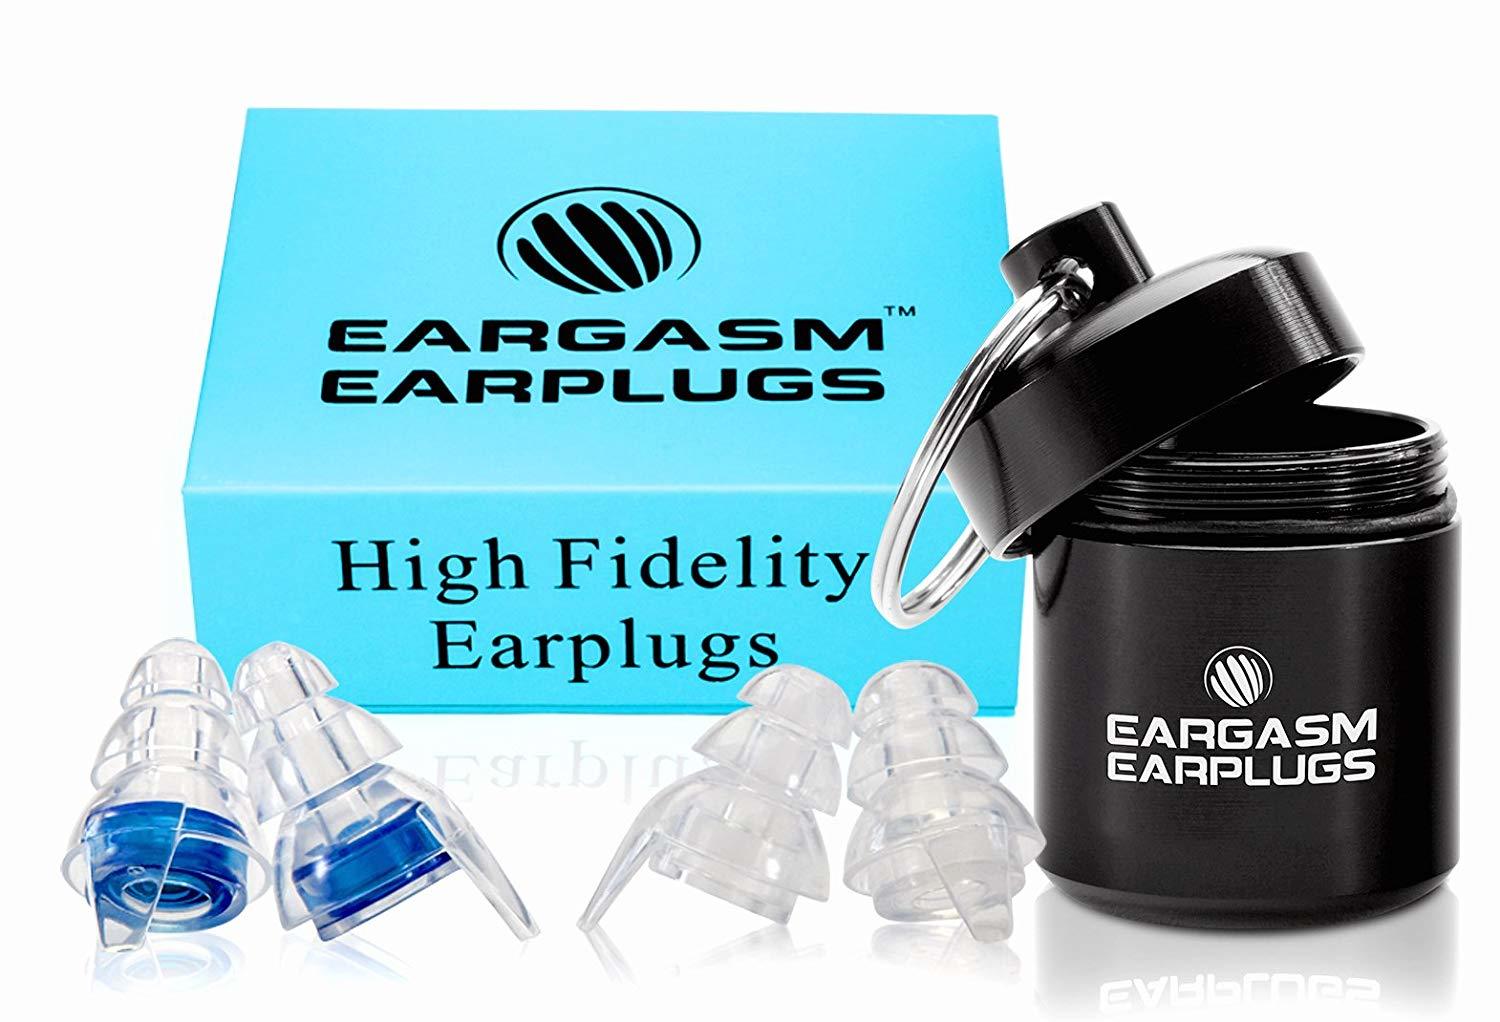 High Fidelity Concert Earplugs DJs Hearing Protection for Music Festivals ONSON HiFi Ear Plugs for Musicians Motorcycles Noise Reduction Ear Plugs 